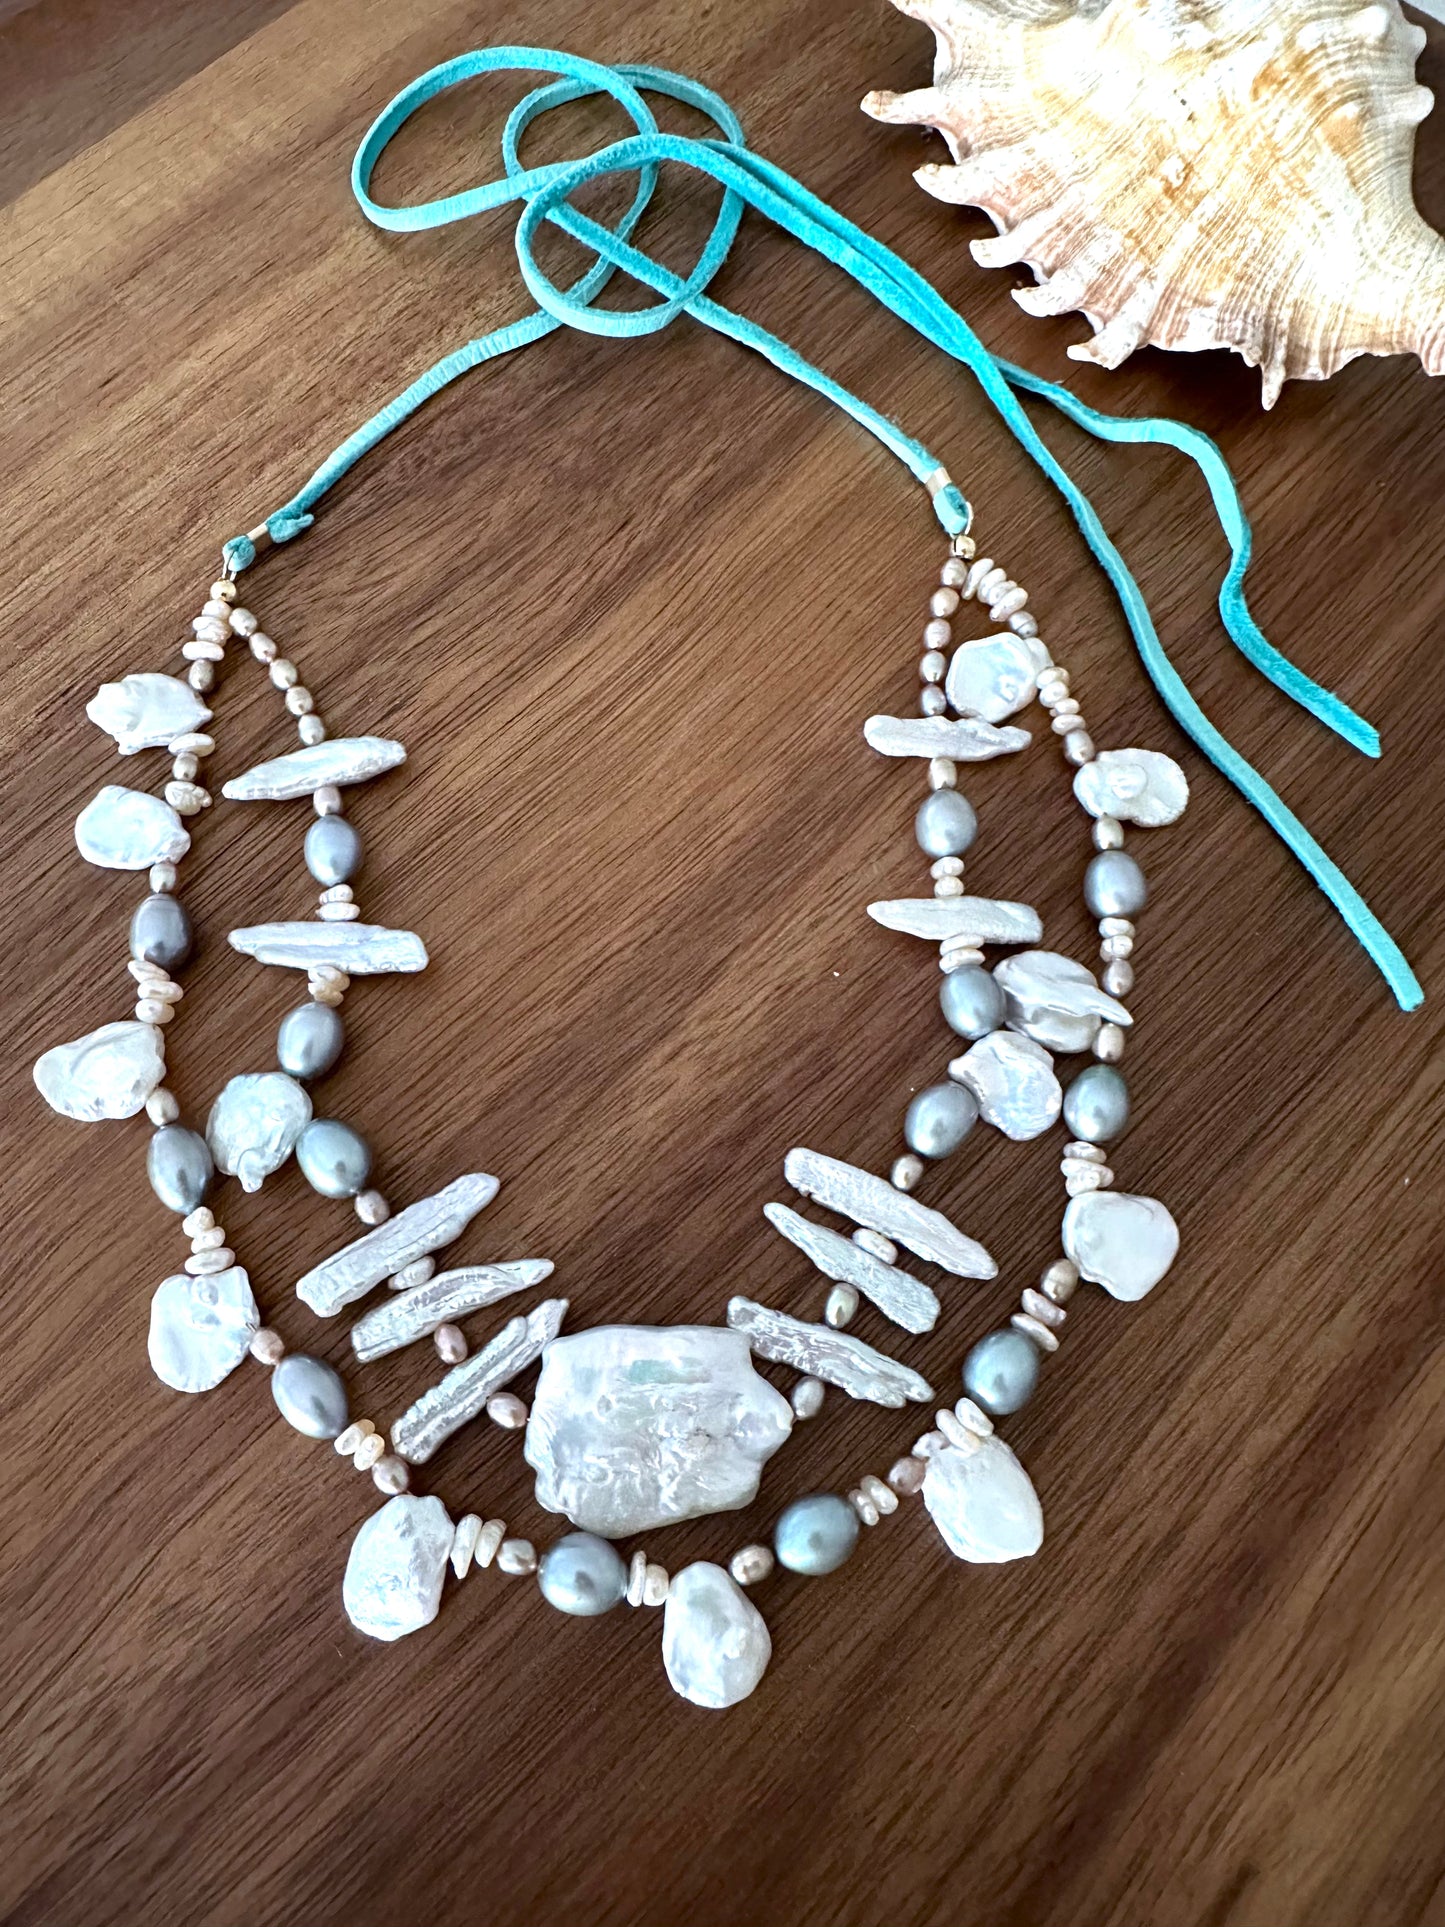 a necklace with two strands of white and grey long and round pearls and a large cloud shaped pearl in the center with a turquoise tail on a wooden background. a seashell is in the upper right corner